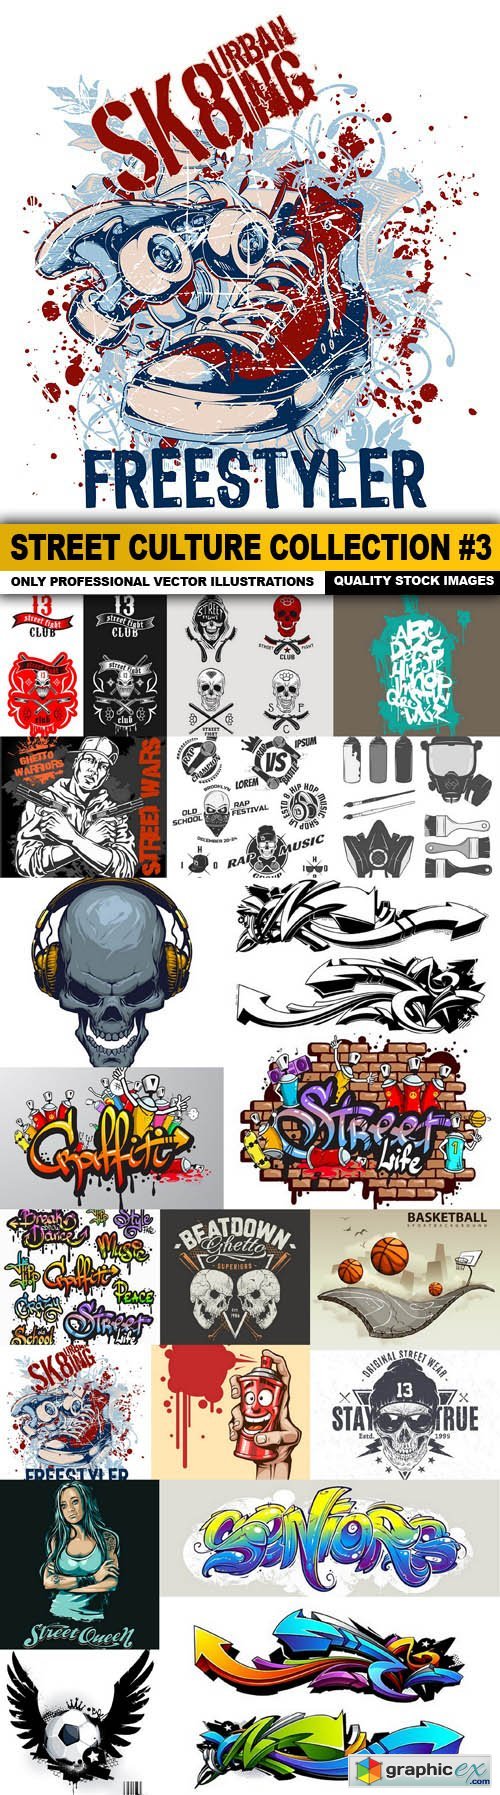 Street Culture Collection #3 - 20 Vector